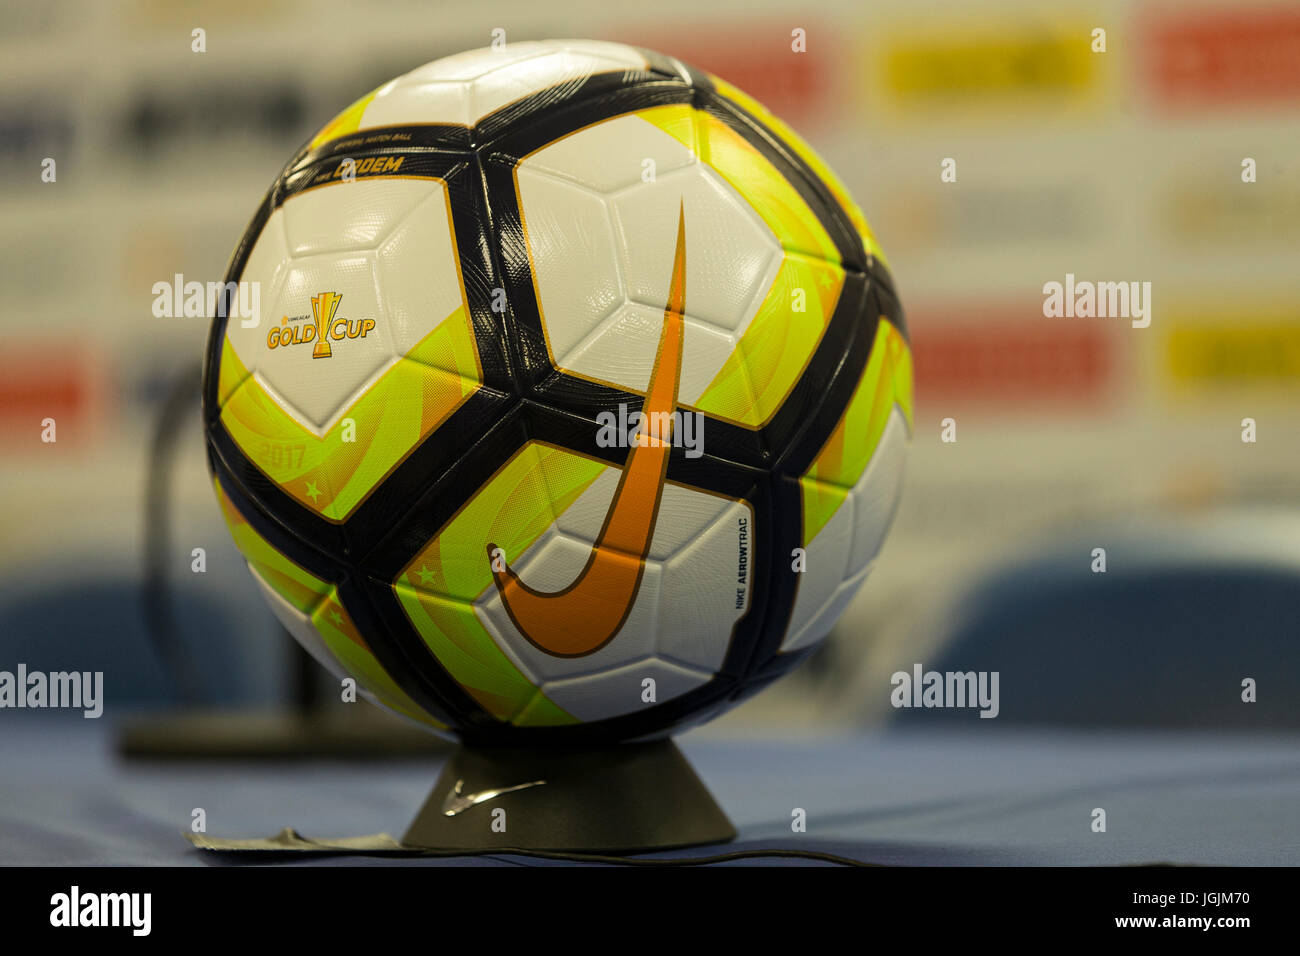 Harrison, United States. 07th July, 2017. Official Nike ball of CONCACAF  Gold Cup on display at Red Bulls Arena Canada won 4 - 2 Credit: Lev  Radin/Pacific Press/Alamy Live News Stock Photo - Alamy